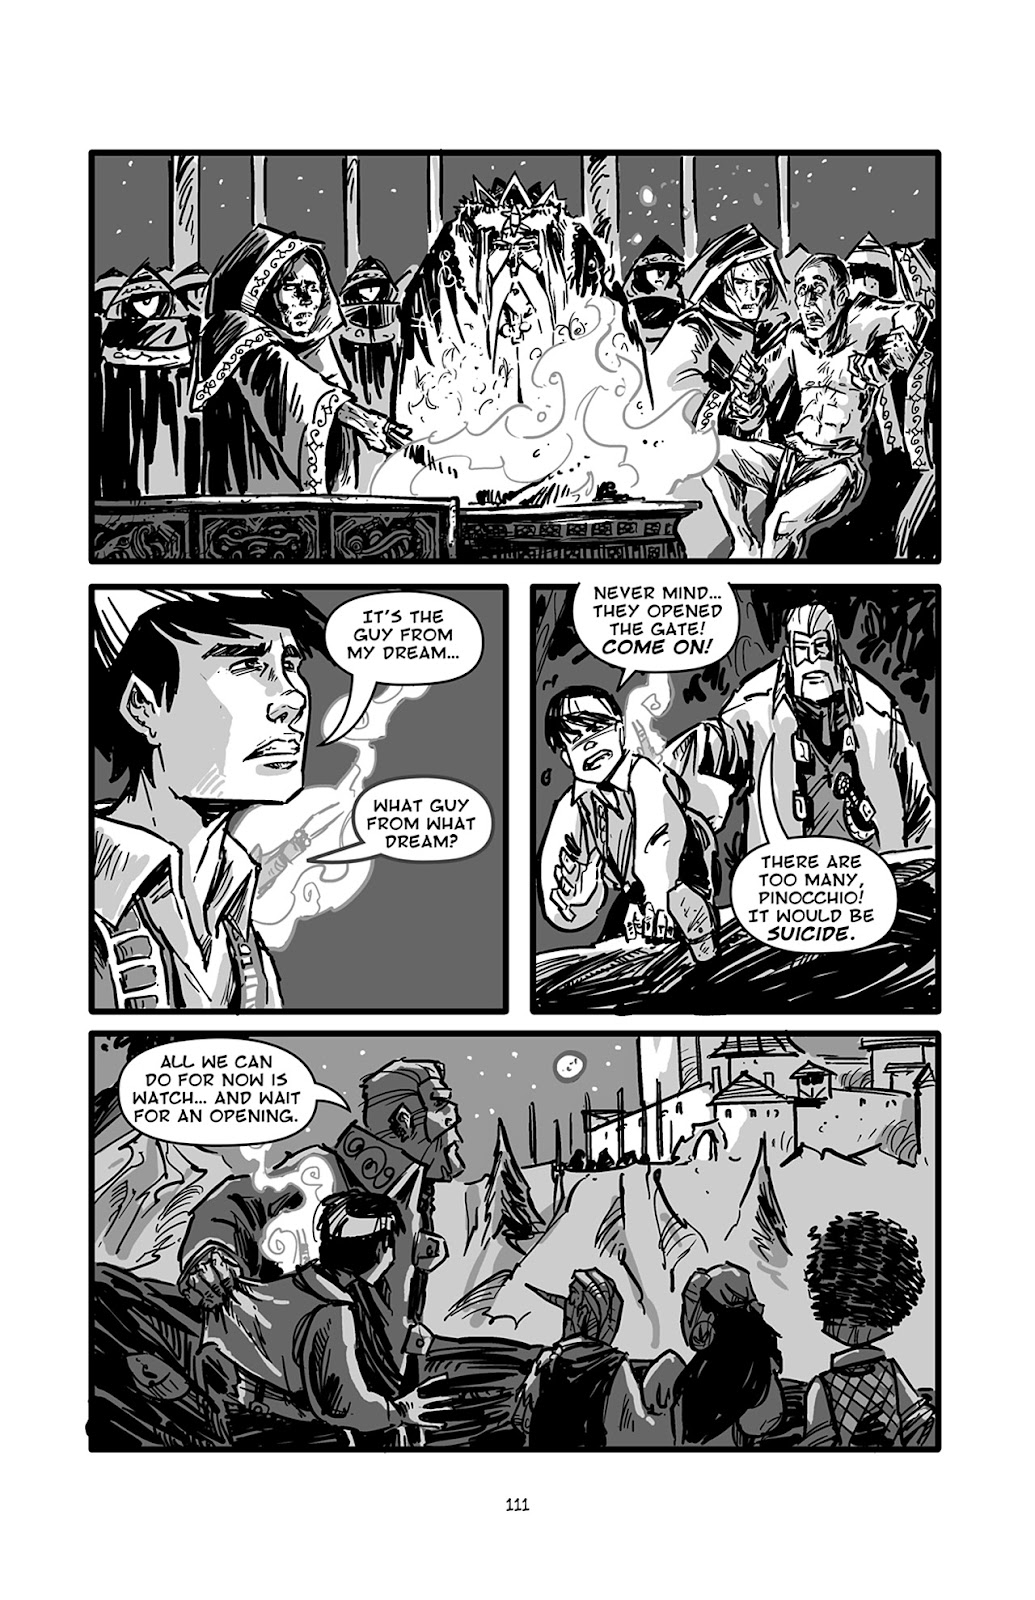 Pinocchio: Vampire Slayer - Of Wood and Blood issue 5 - Page 12